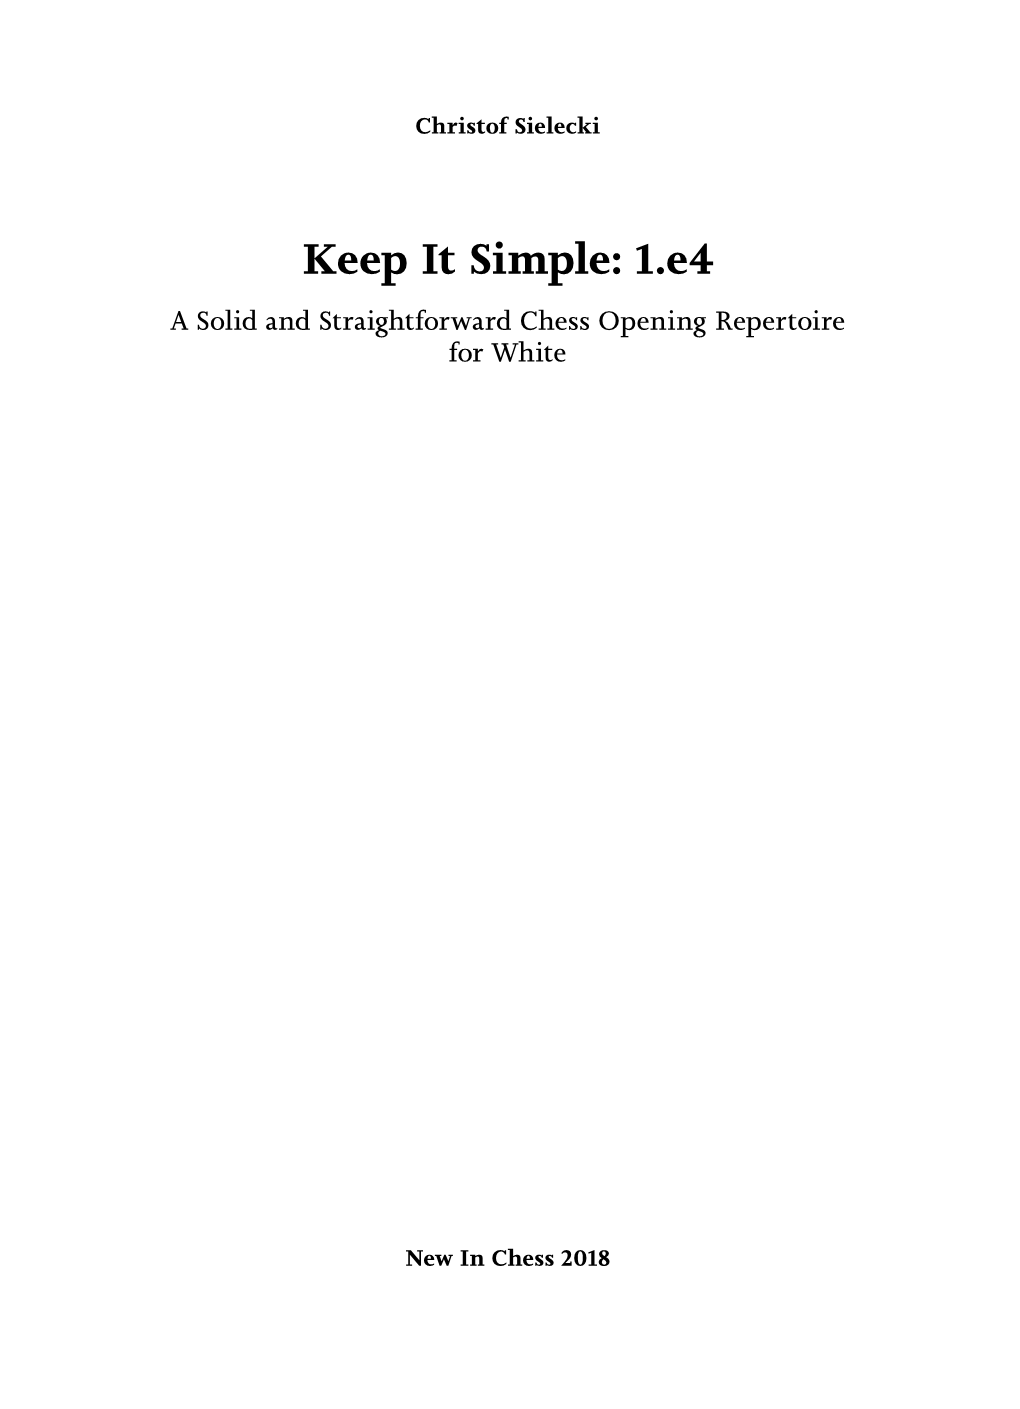 Keep It Simple: 1.E4 a Solid and Straightforward Chess Opening Repertoire for White